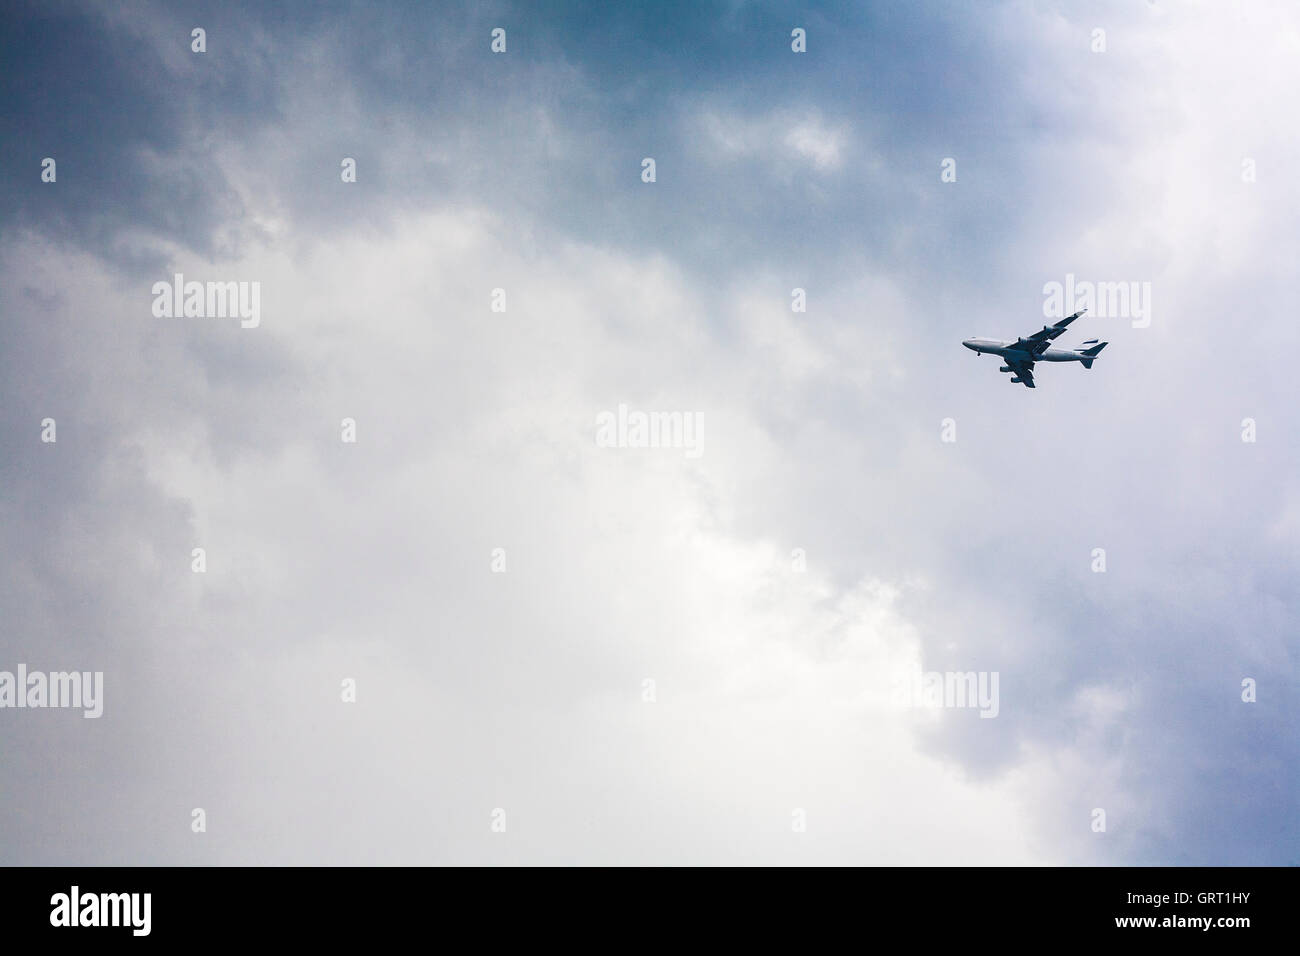 Passenger plane approaching against a stormy sky Stock Photo